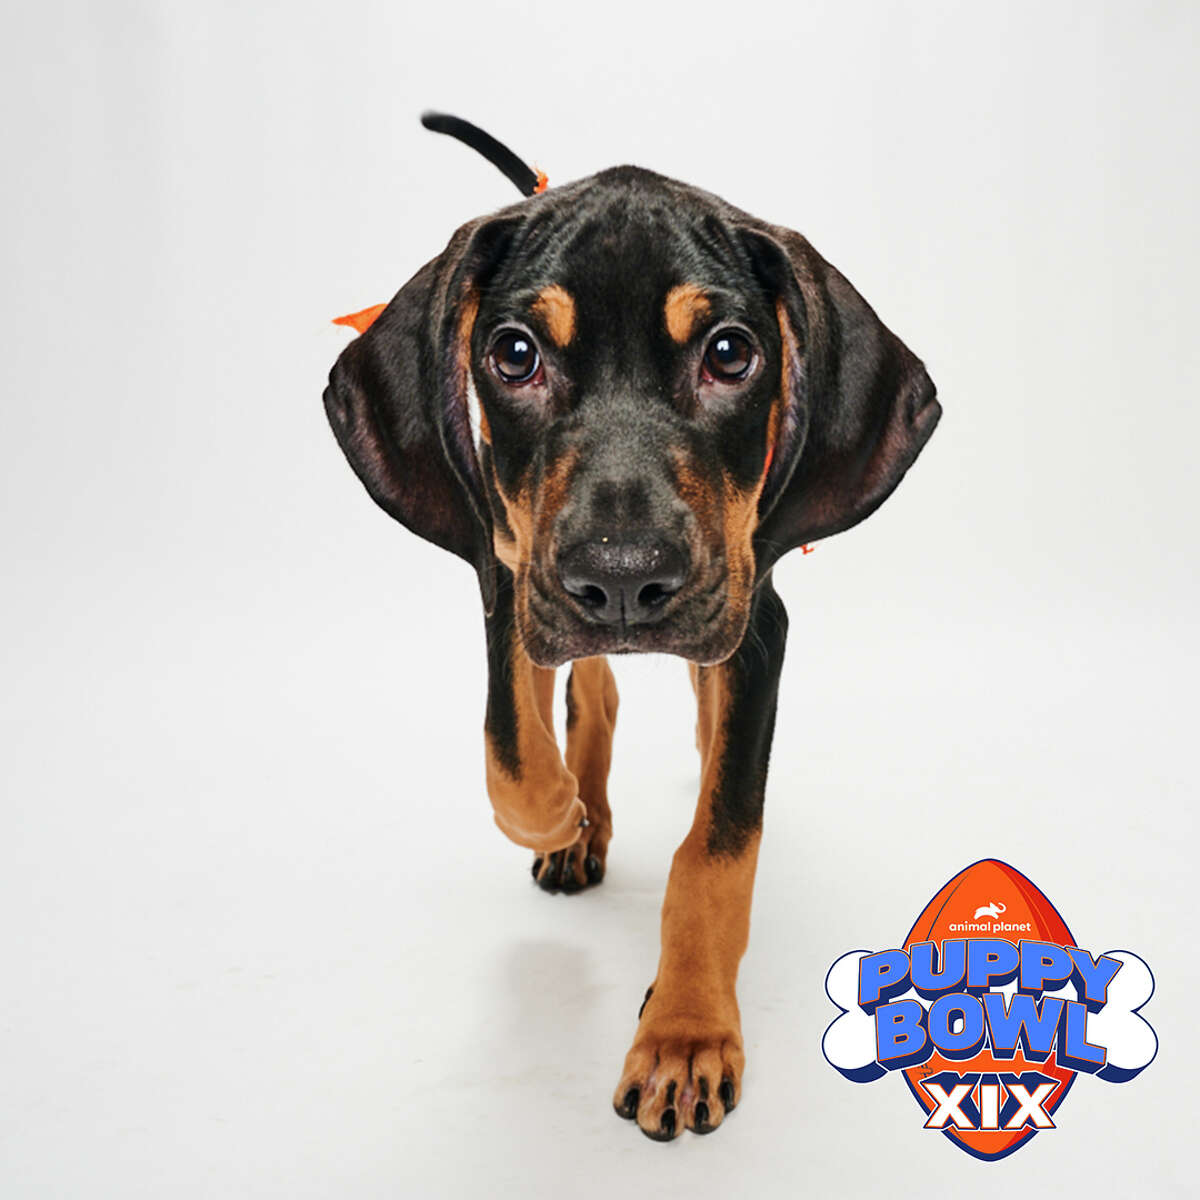 Pauly from ROAR will play in this year's Puppy Bowl on Sunday, Feb. 12.